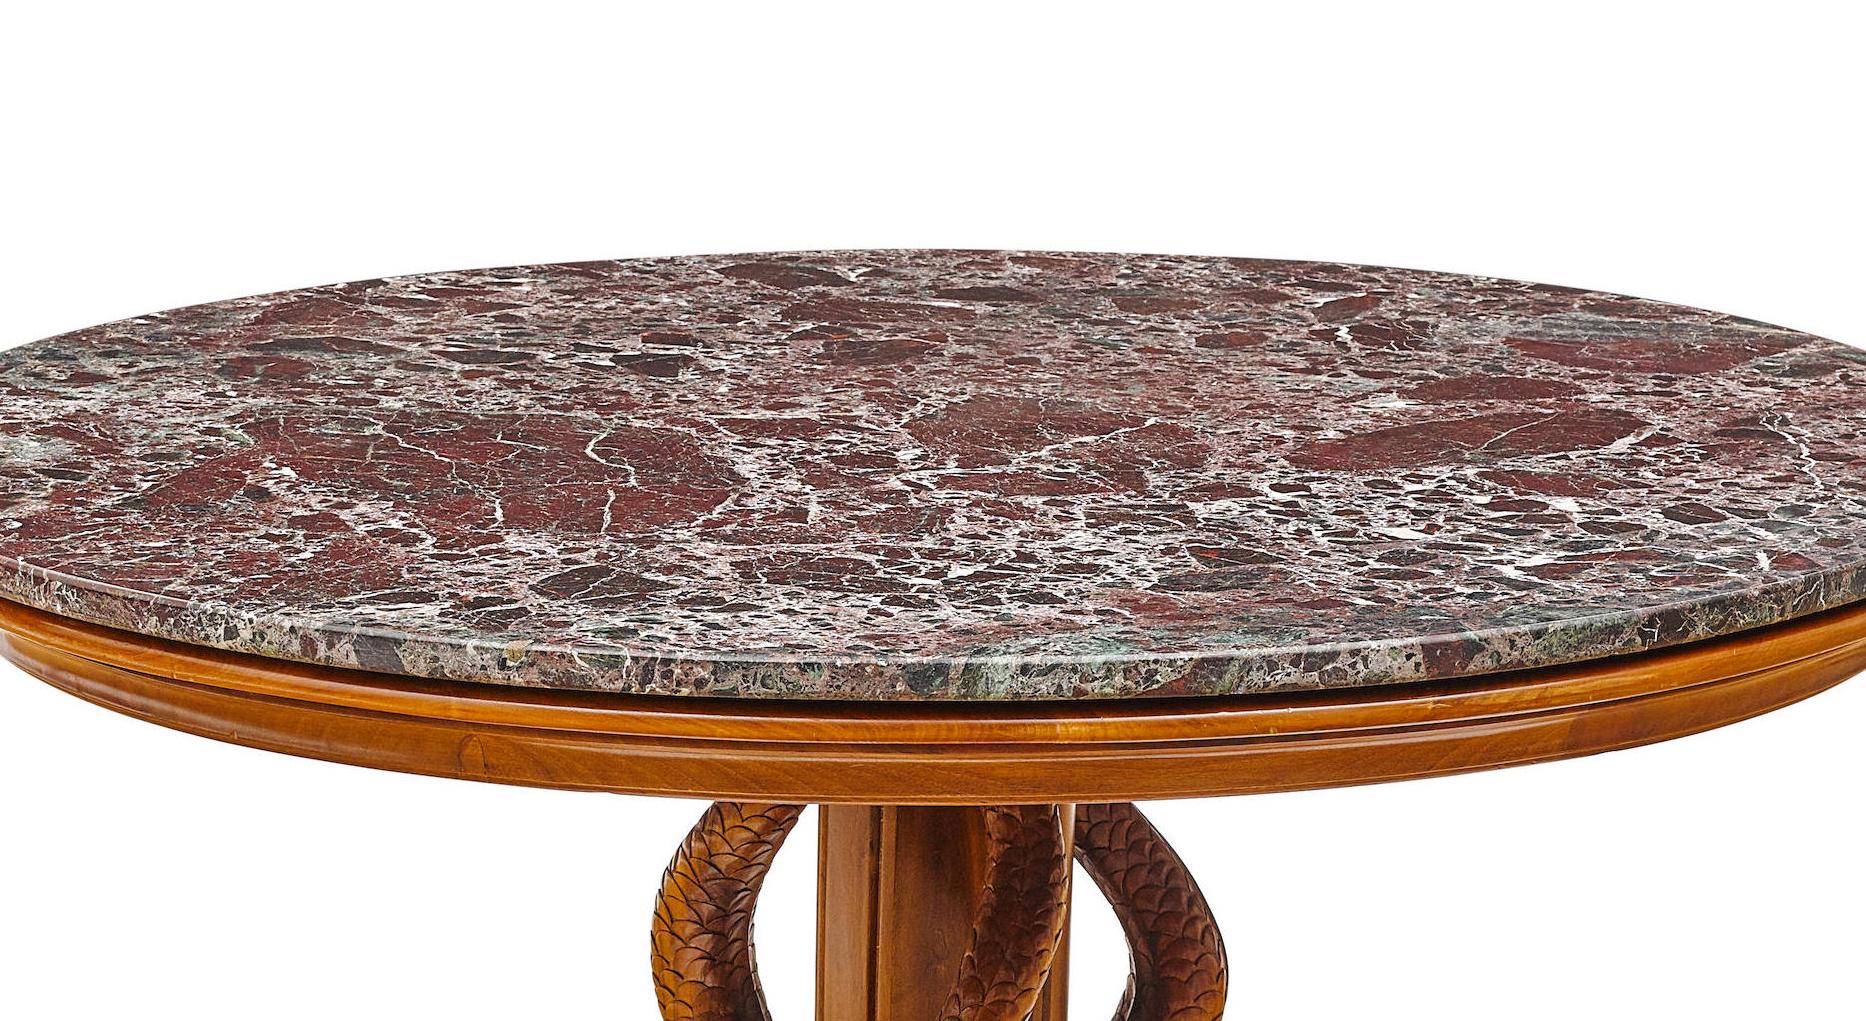 Hand-Carved Round Pedestal Table with Dolphins, Early 20th Century For Sale